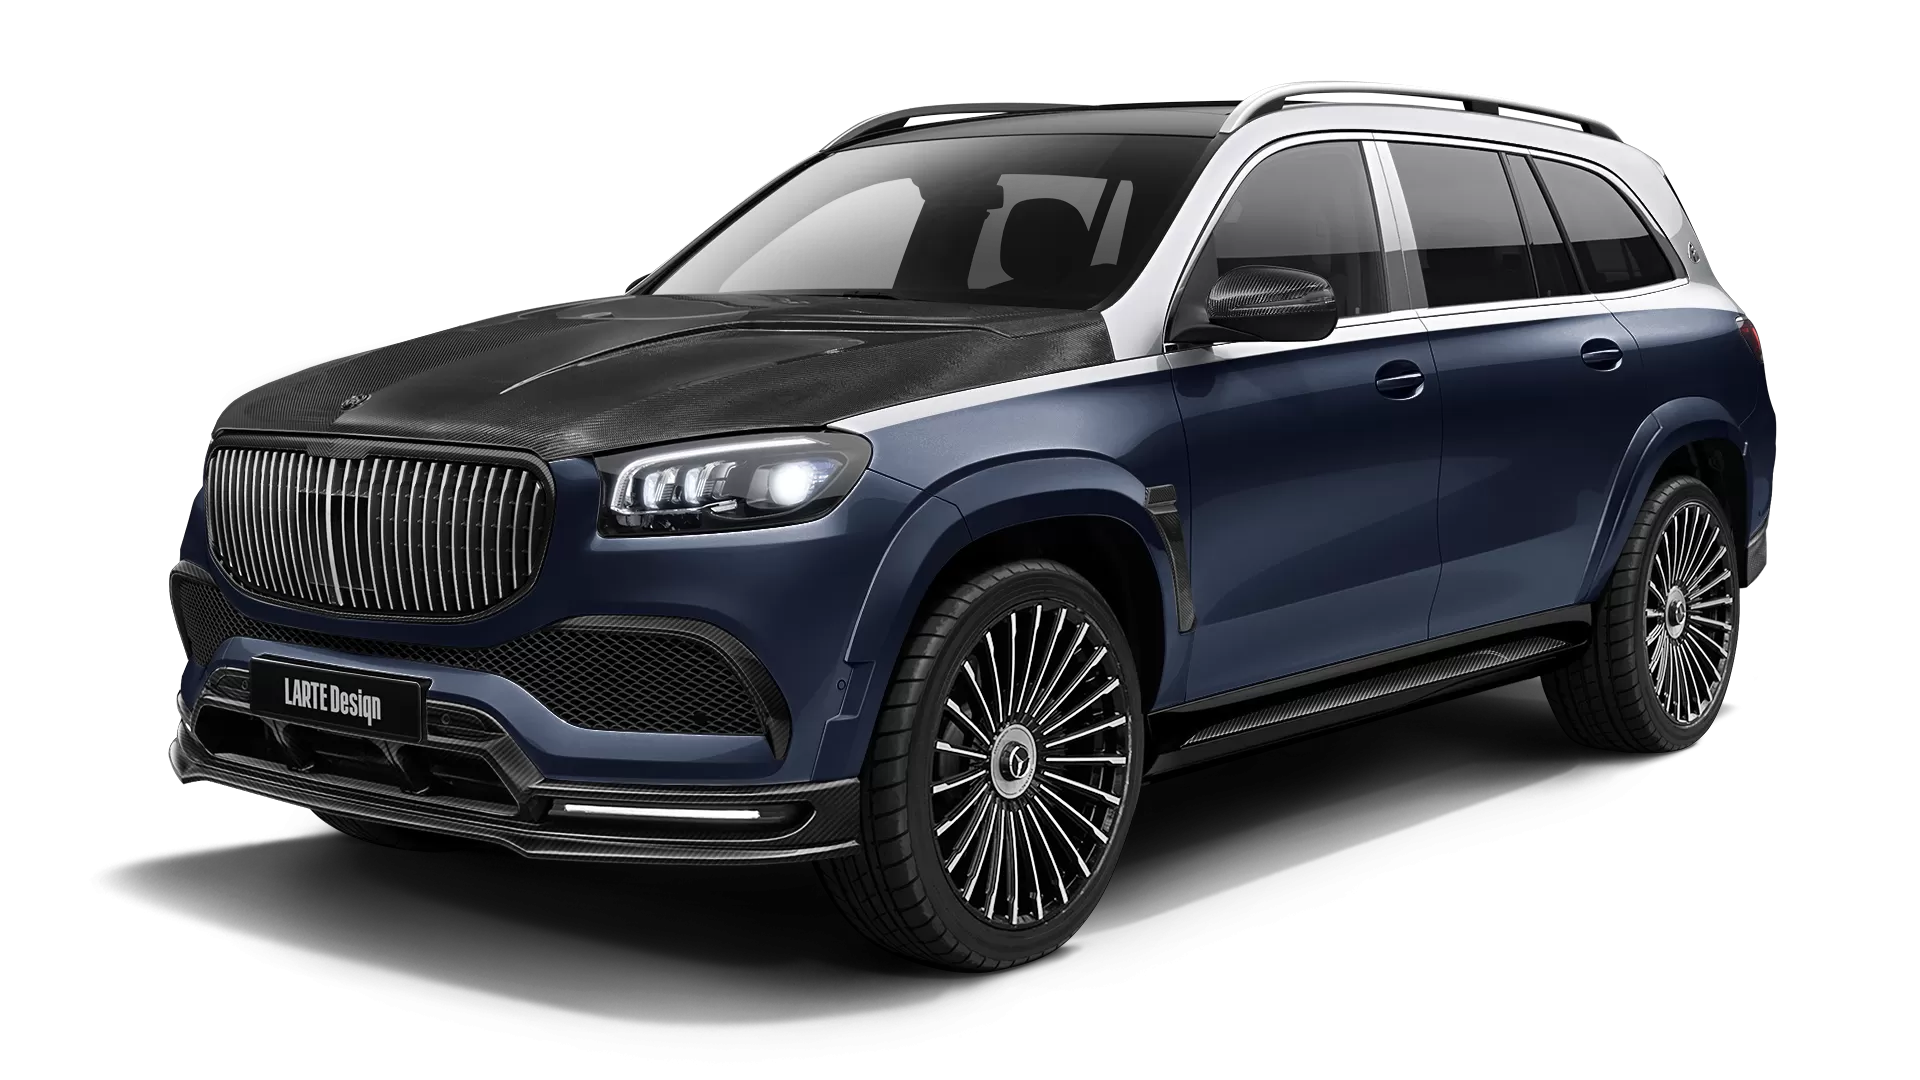 Mercedes Maybach GLS 600 with carbon body kit: front view shown in Cavansite Blue & Iridium Silver